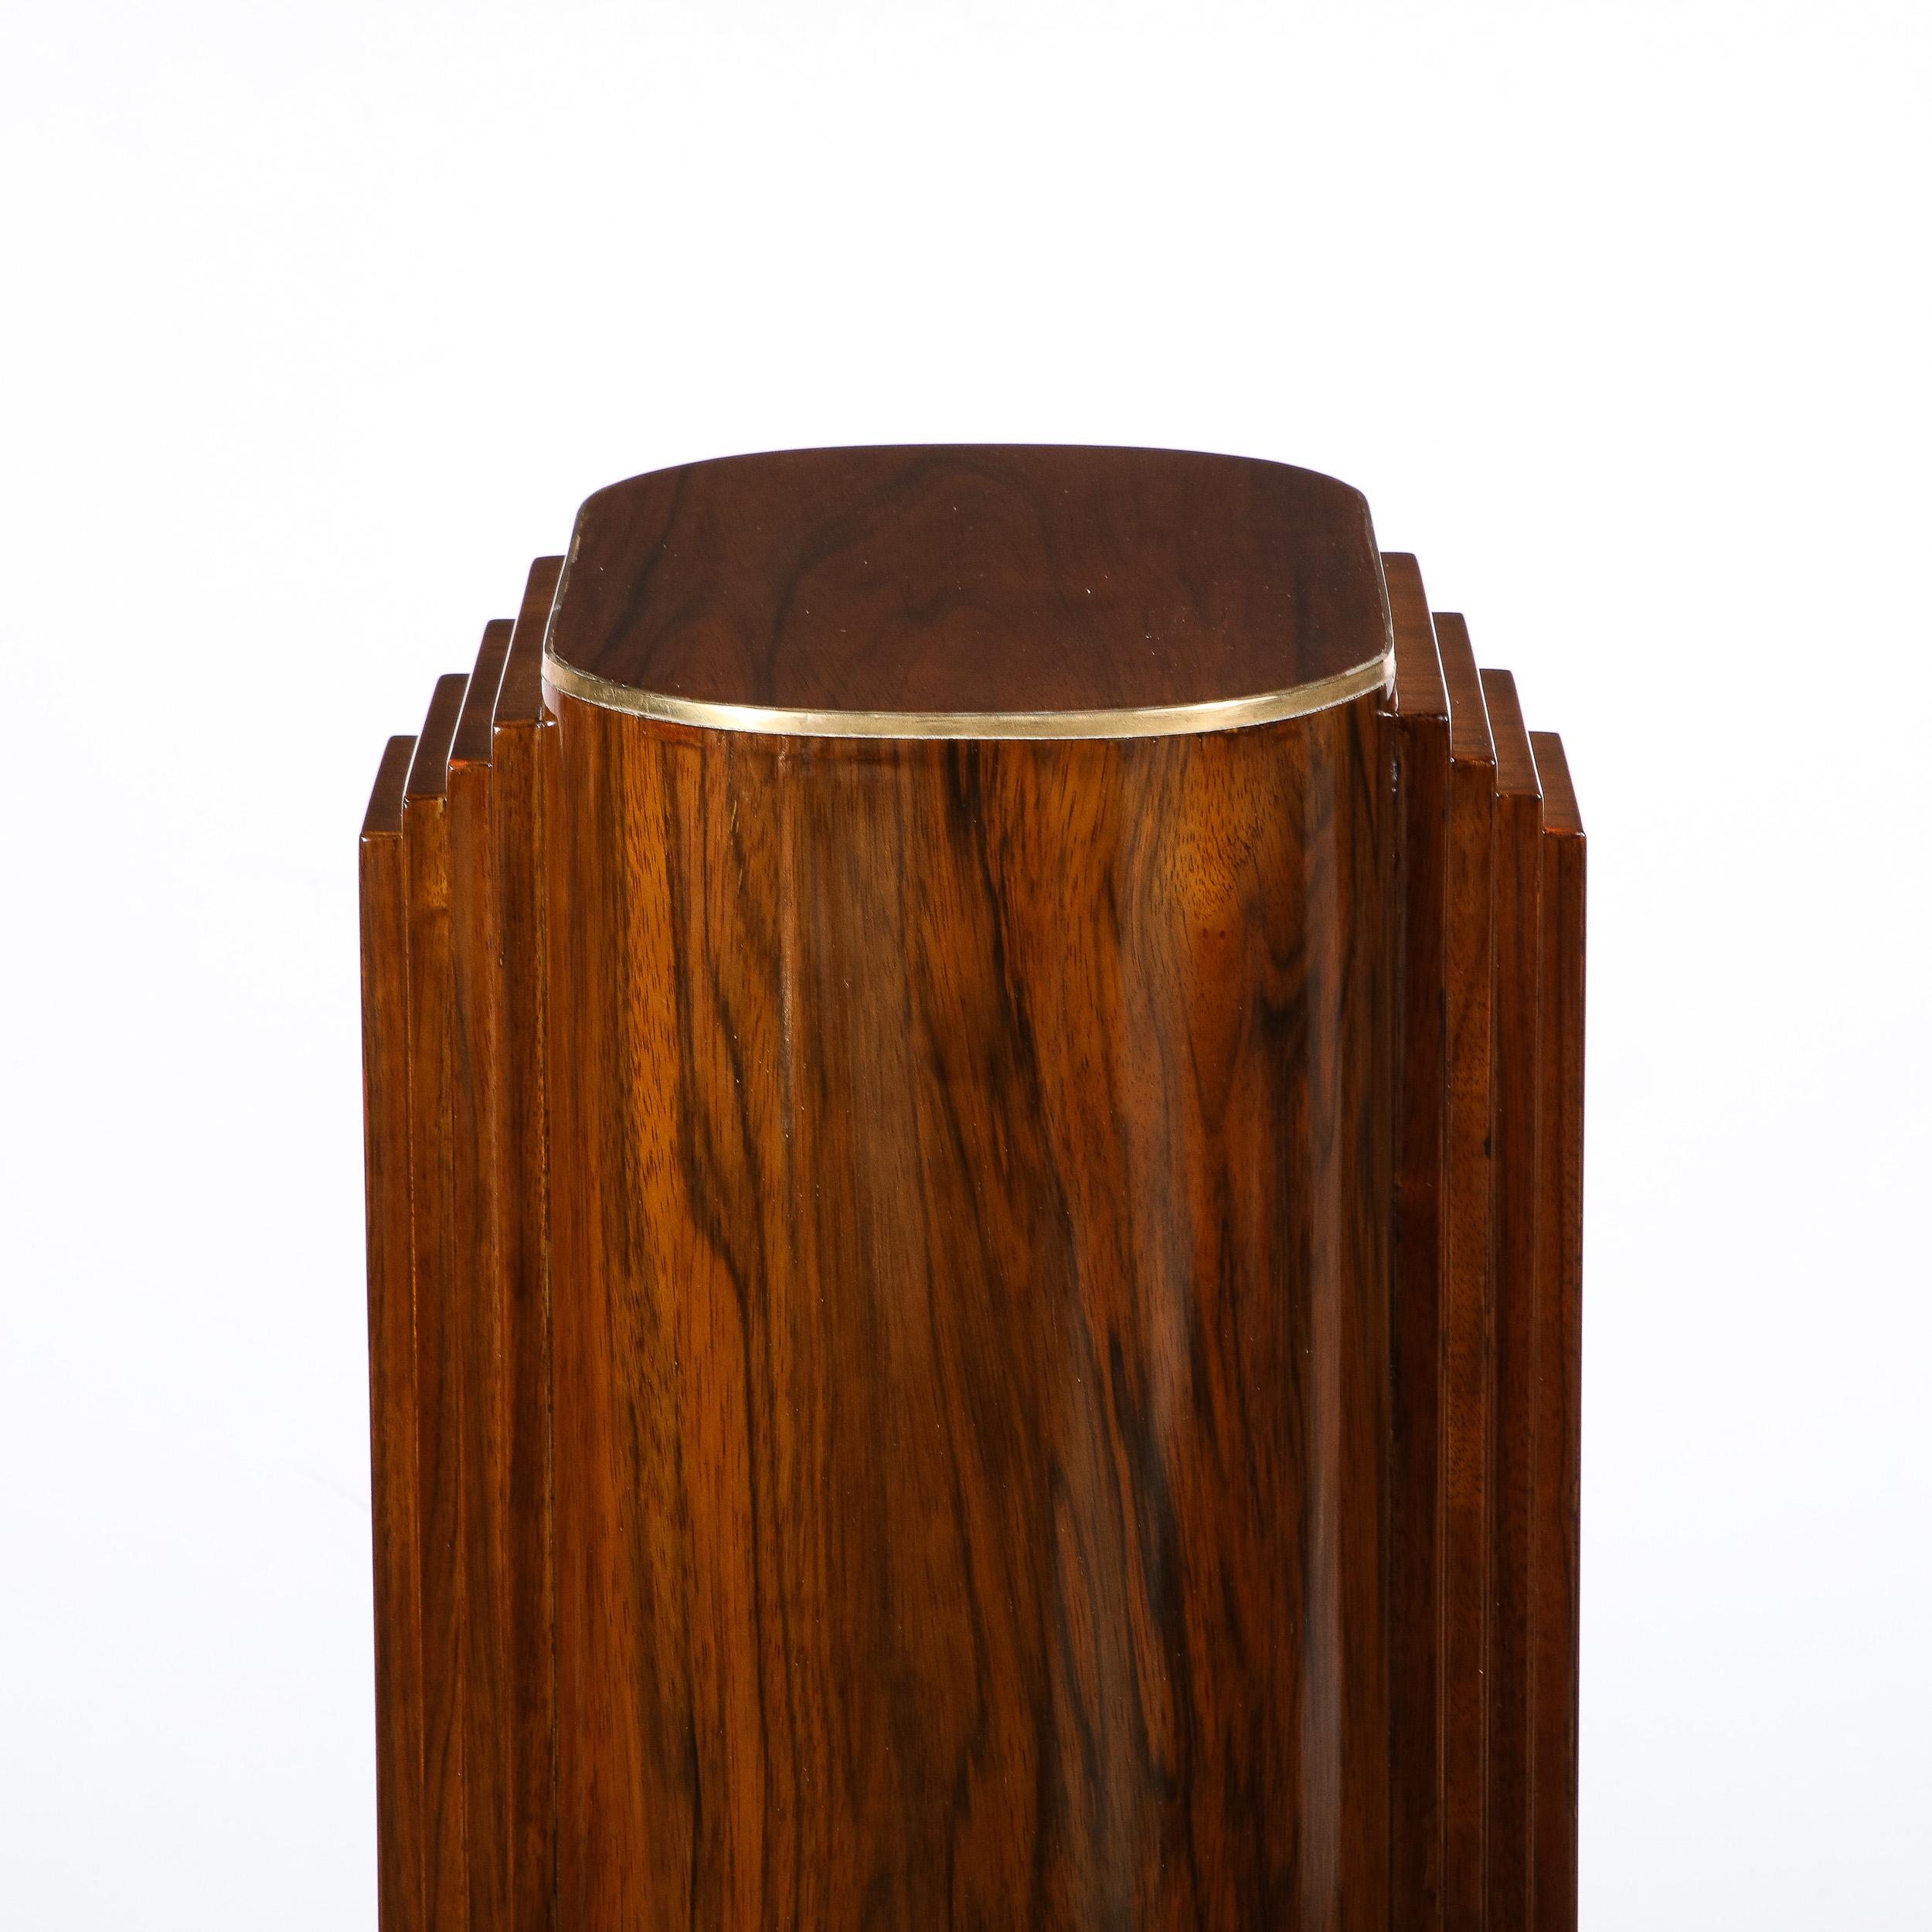 French Art Deco Skyscraper Hand-rubbed Book-matched Walnut Pedestal w/ Brass Inlays For Sale